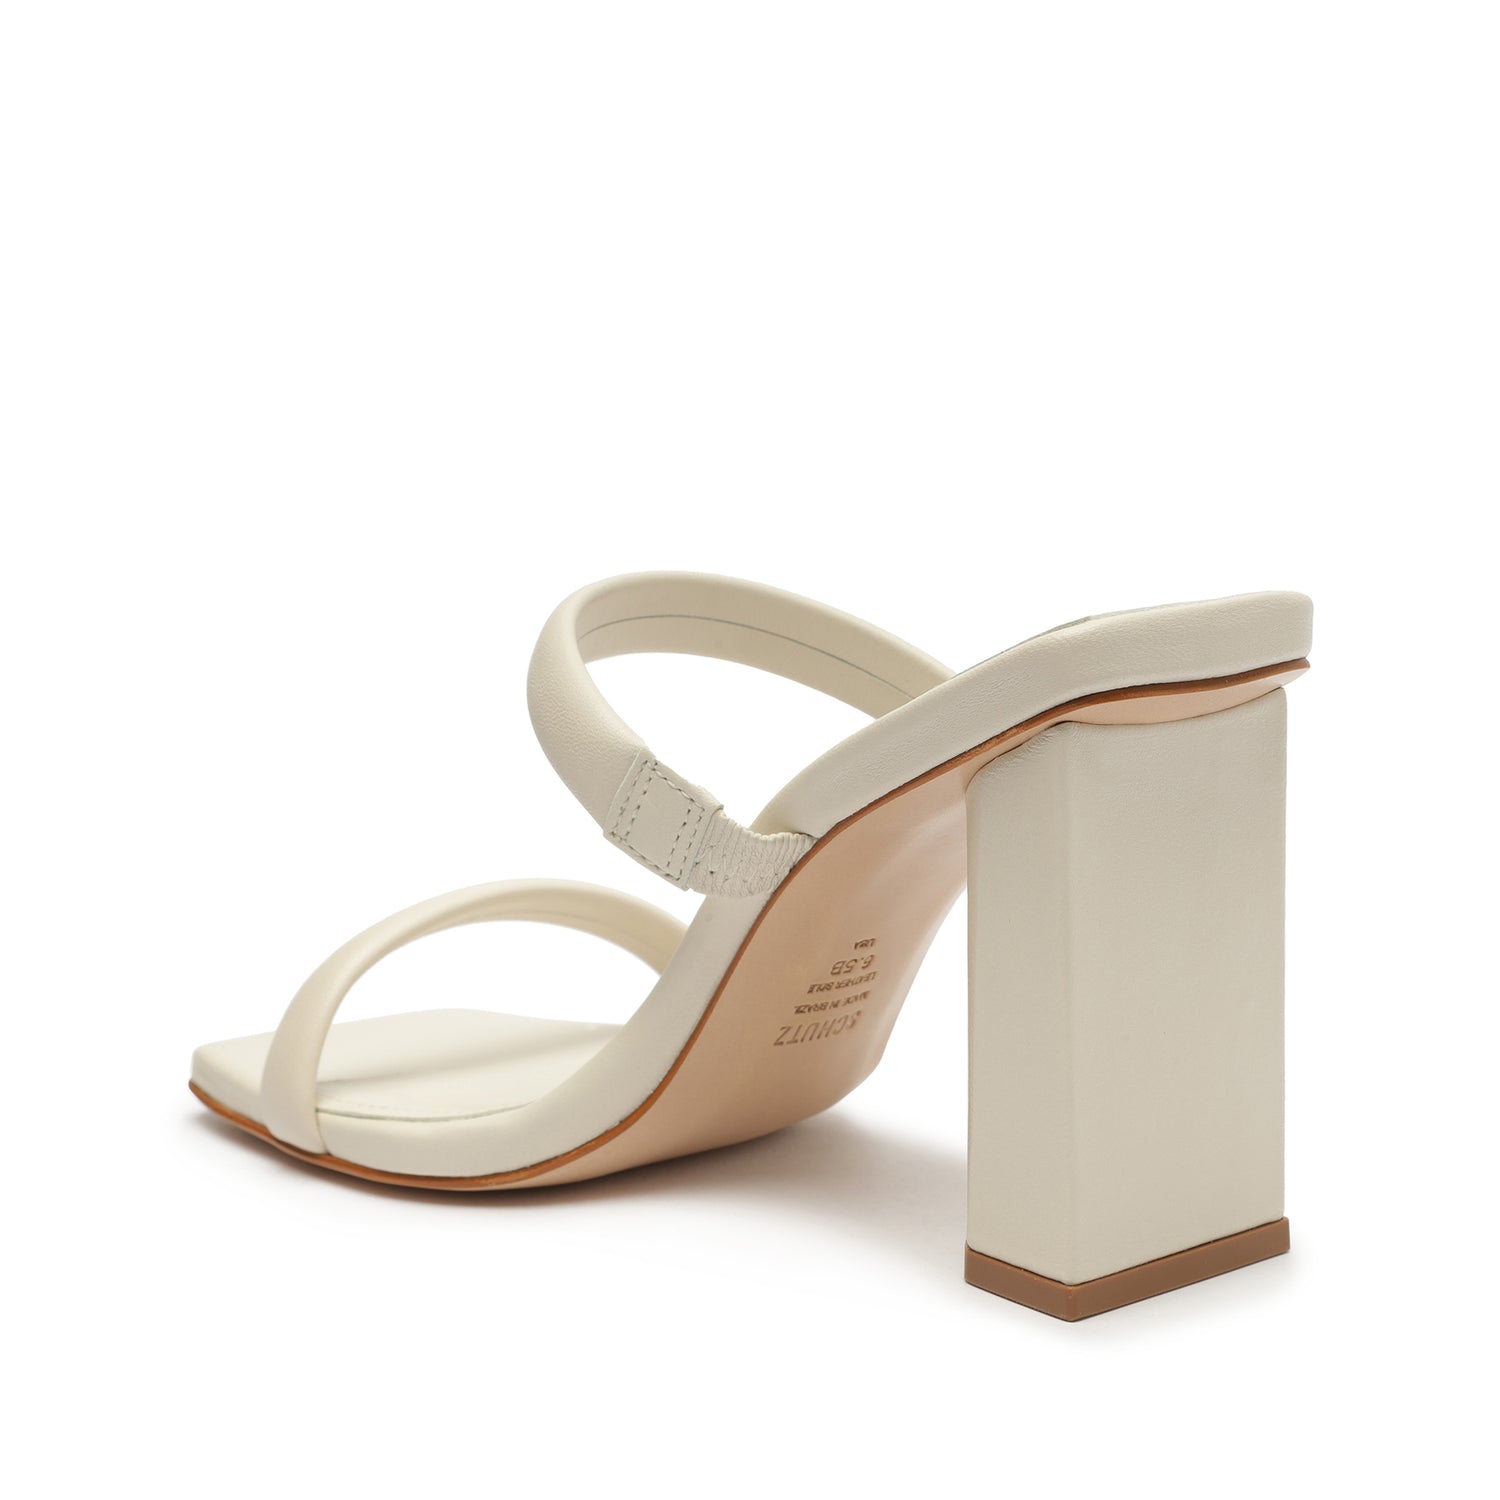 Ully Nappa Leather Sandal Sandals OLD    - Schutz Shoes